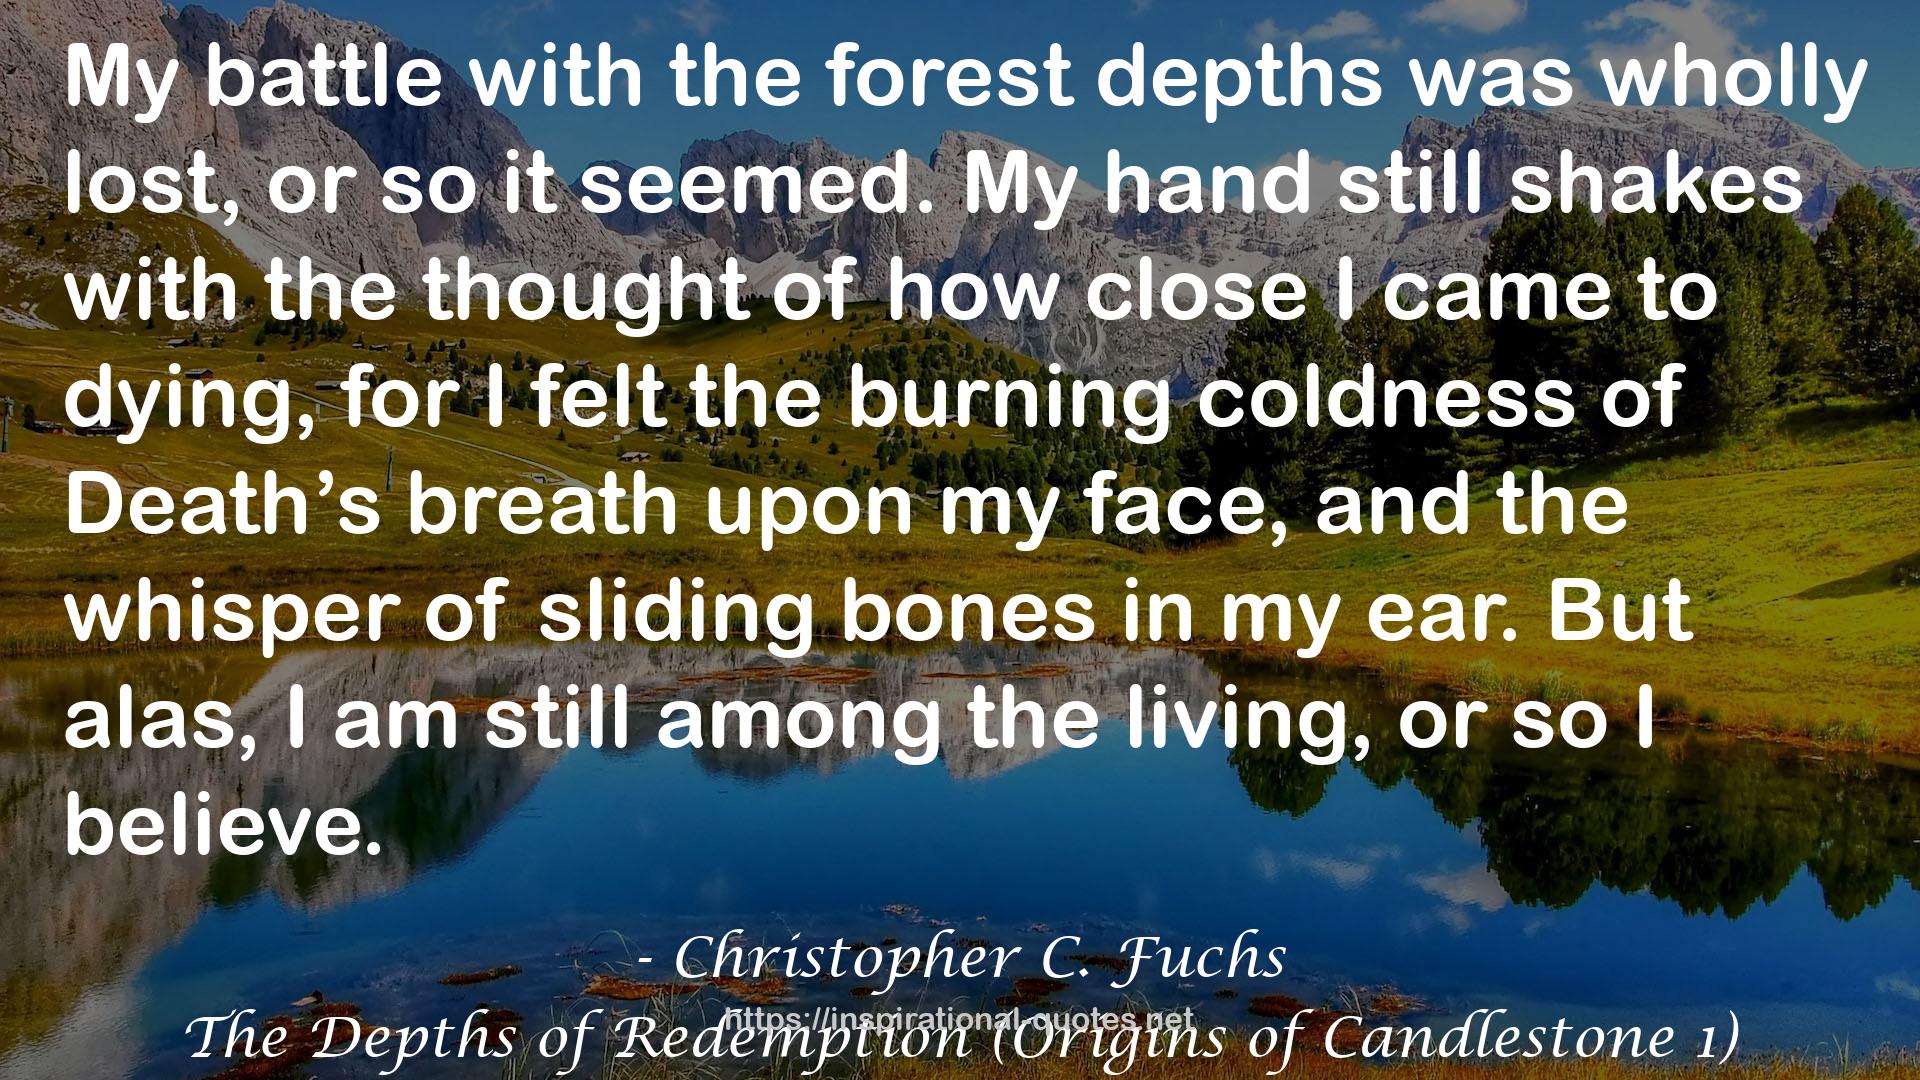 The Depths of Redemption (Origins of Candlestone 1) QUOTES